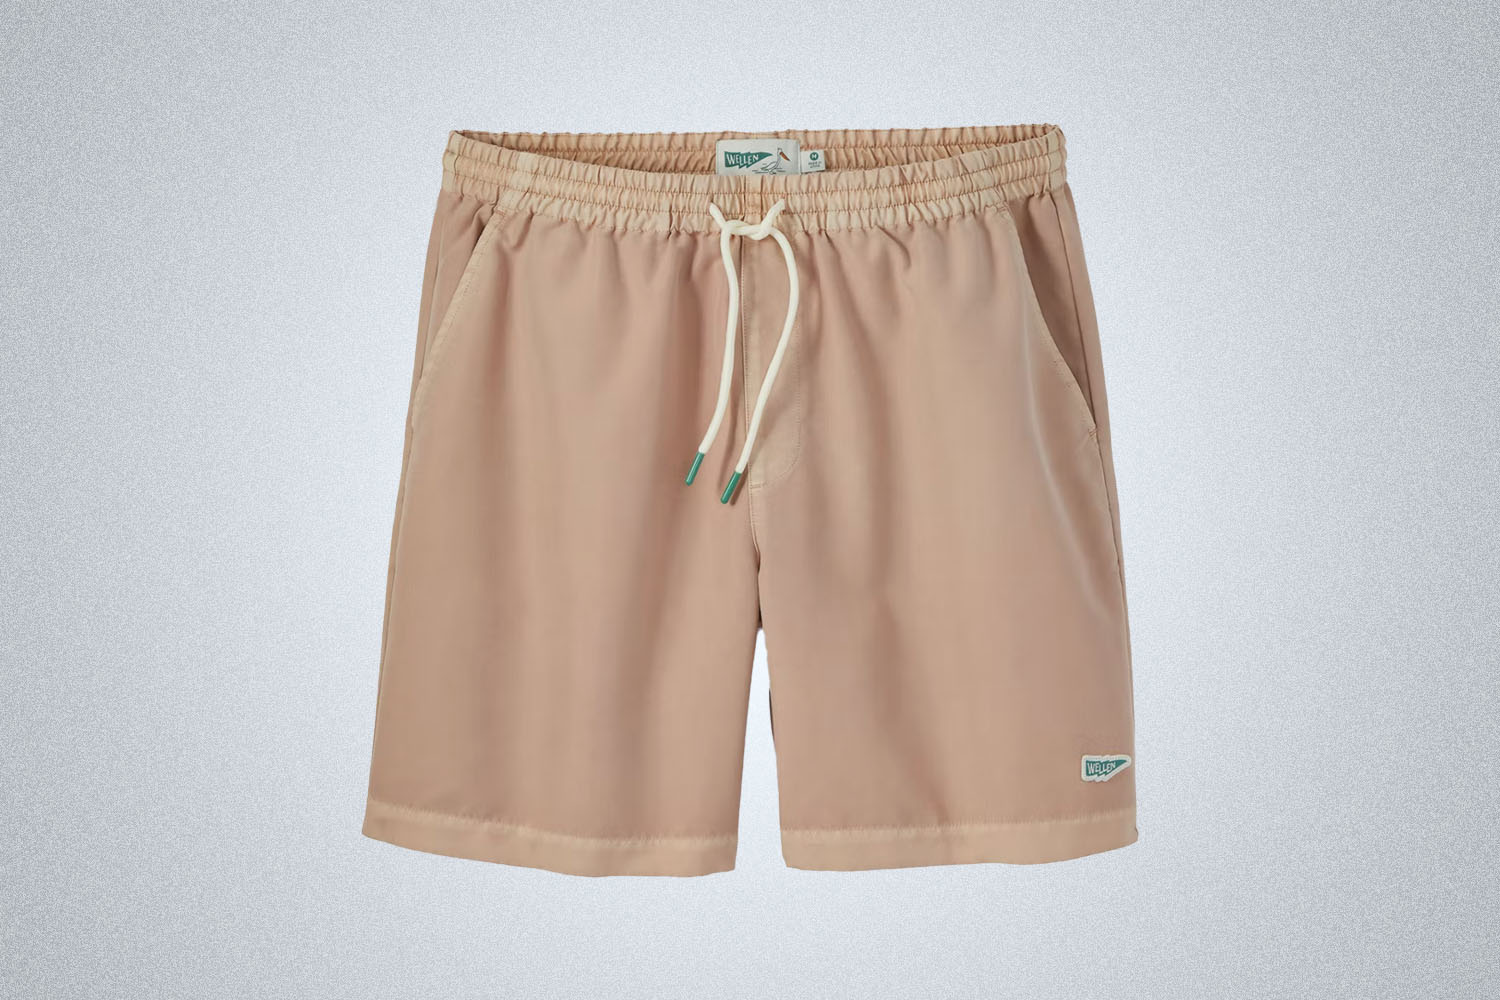 A pair of dusty pink swim trunks from Wellen on a grey background